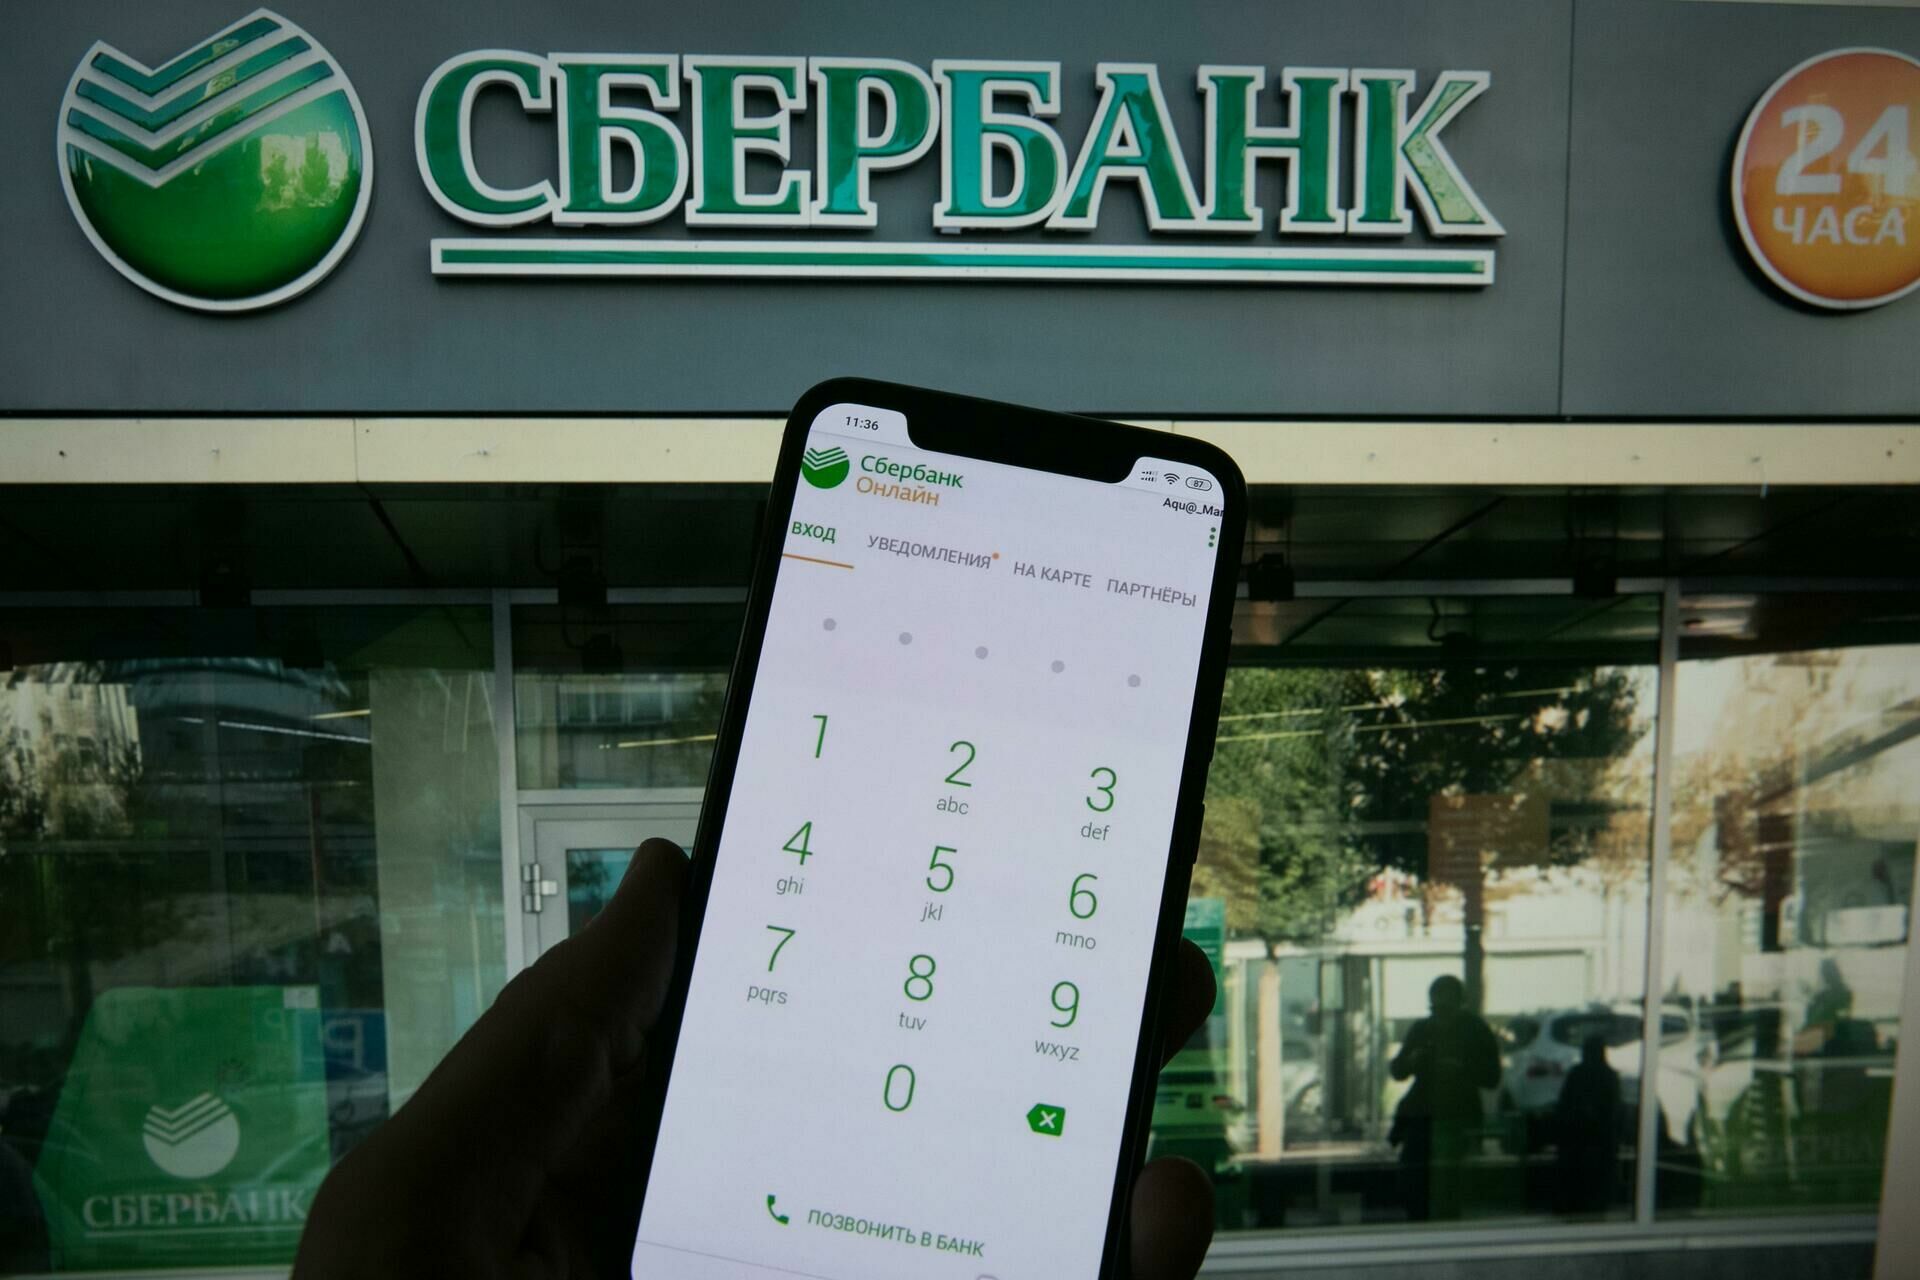 A malfunction occured in the Sberbank’s network